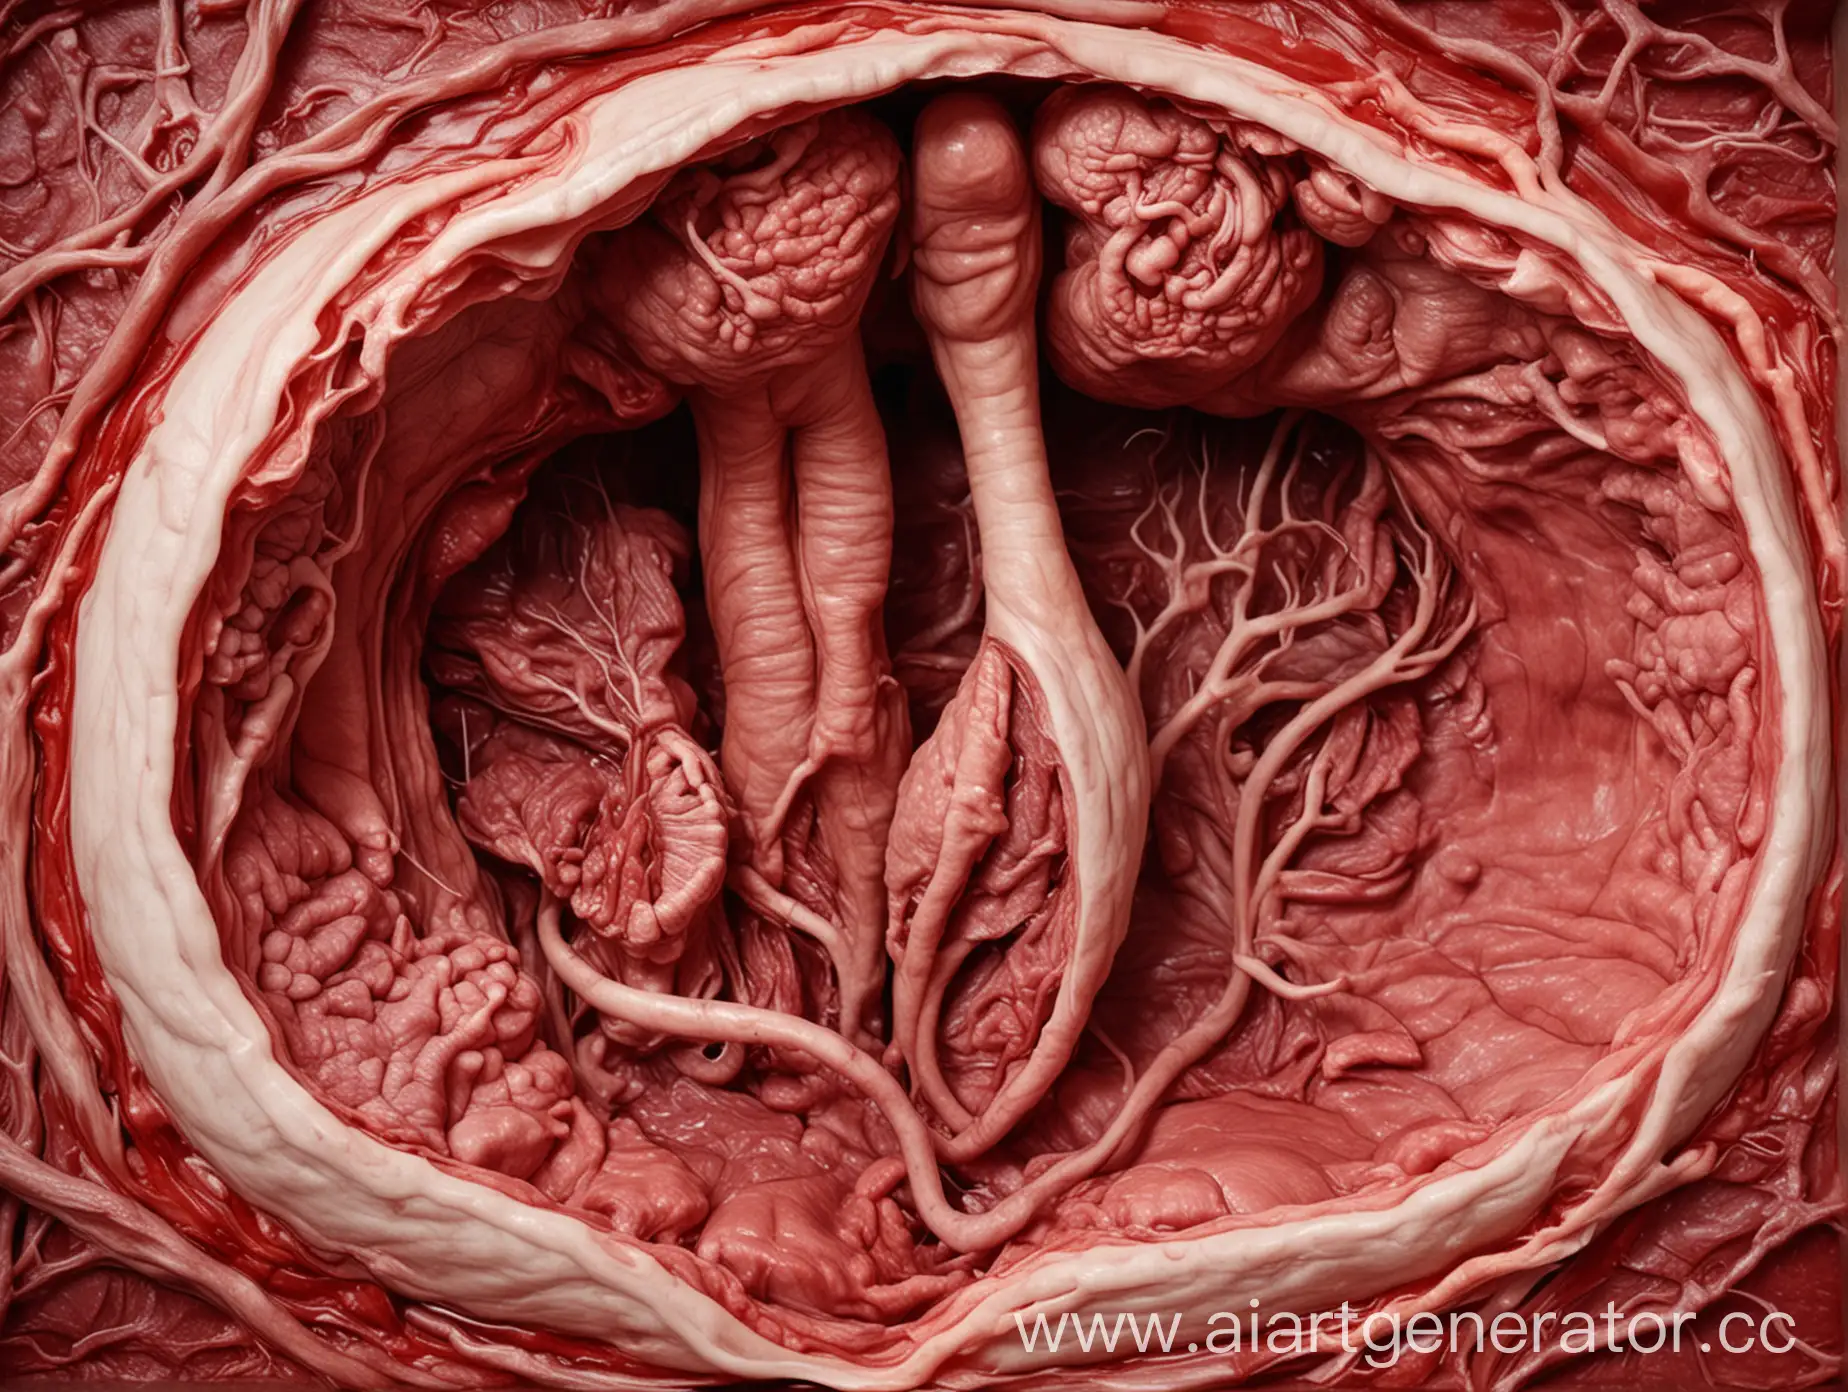 Organic-Landscape-Womb-Veins-and-Meat-Interior